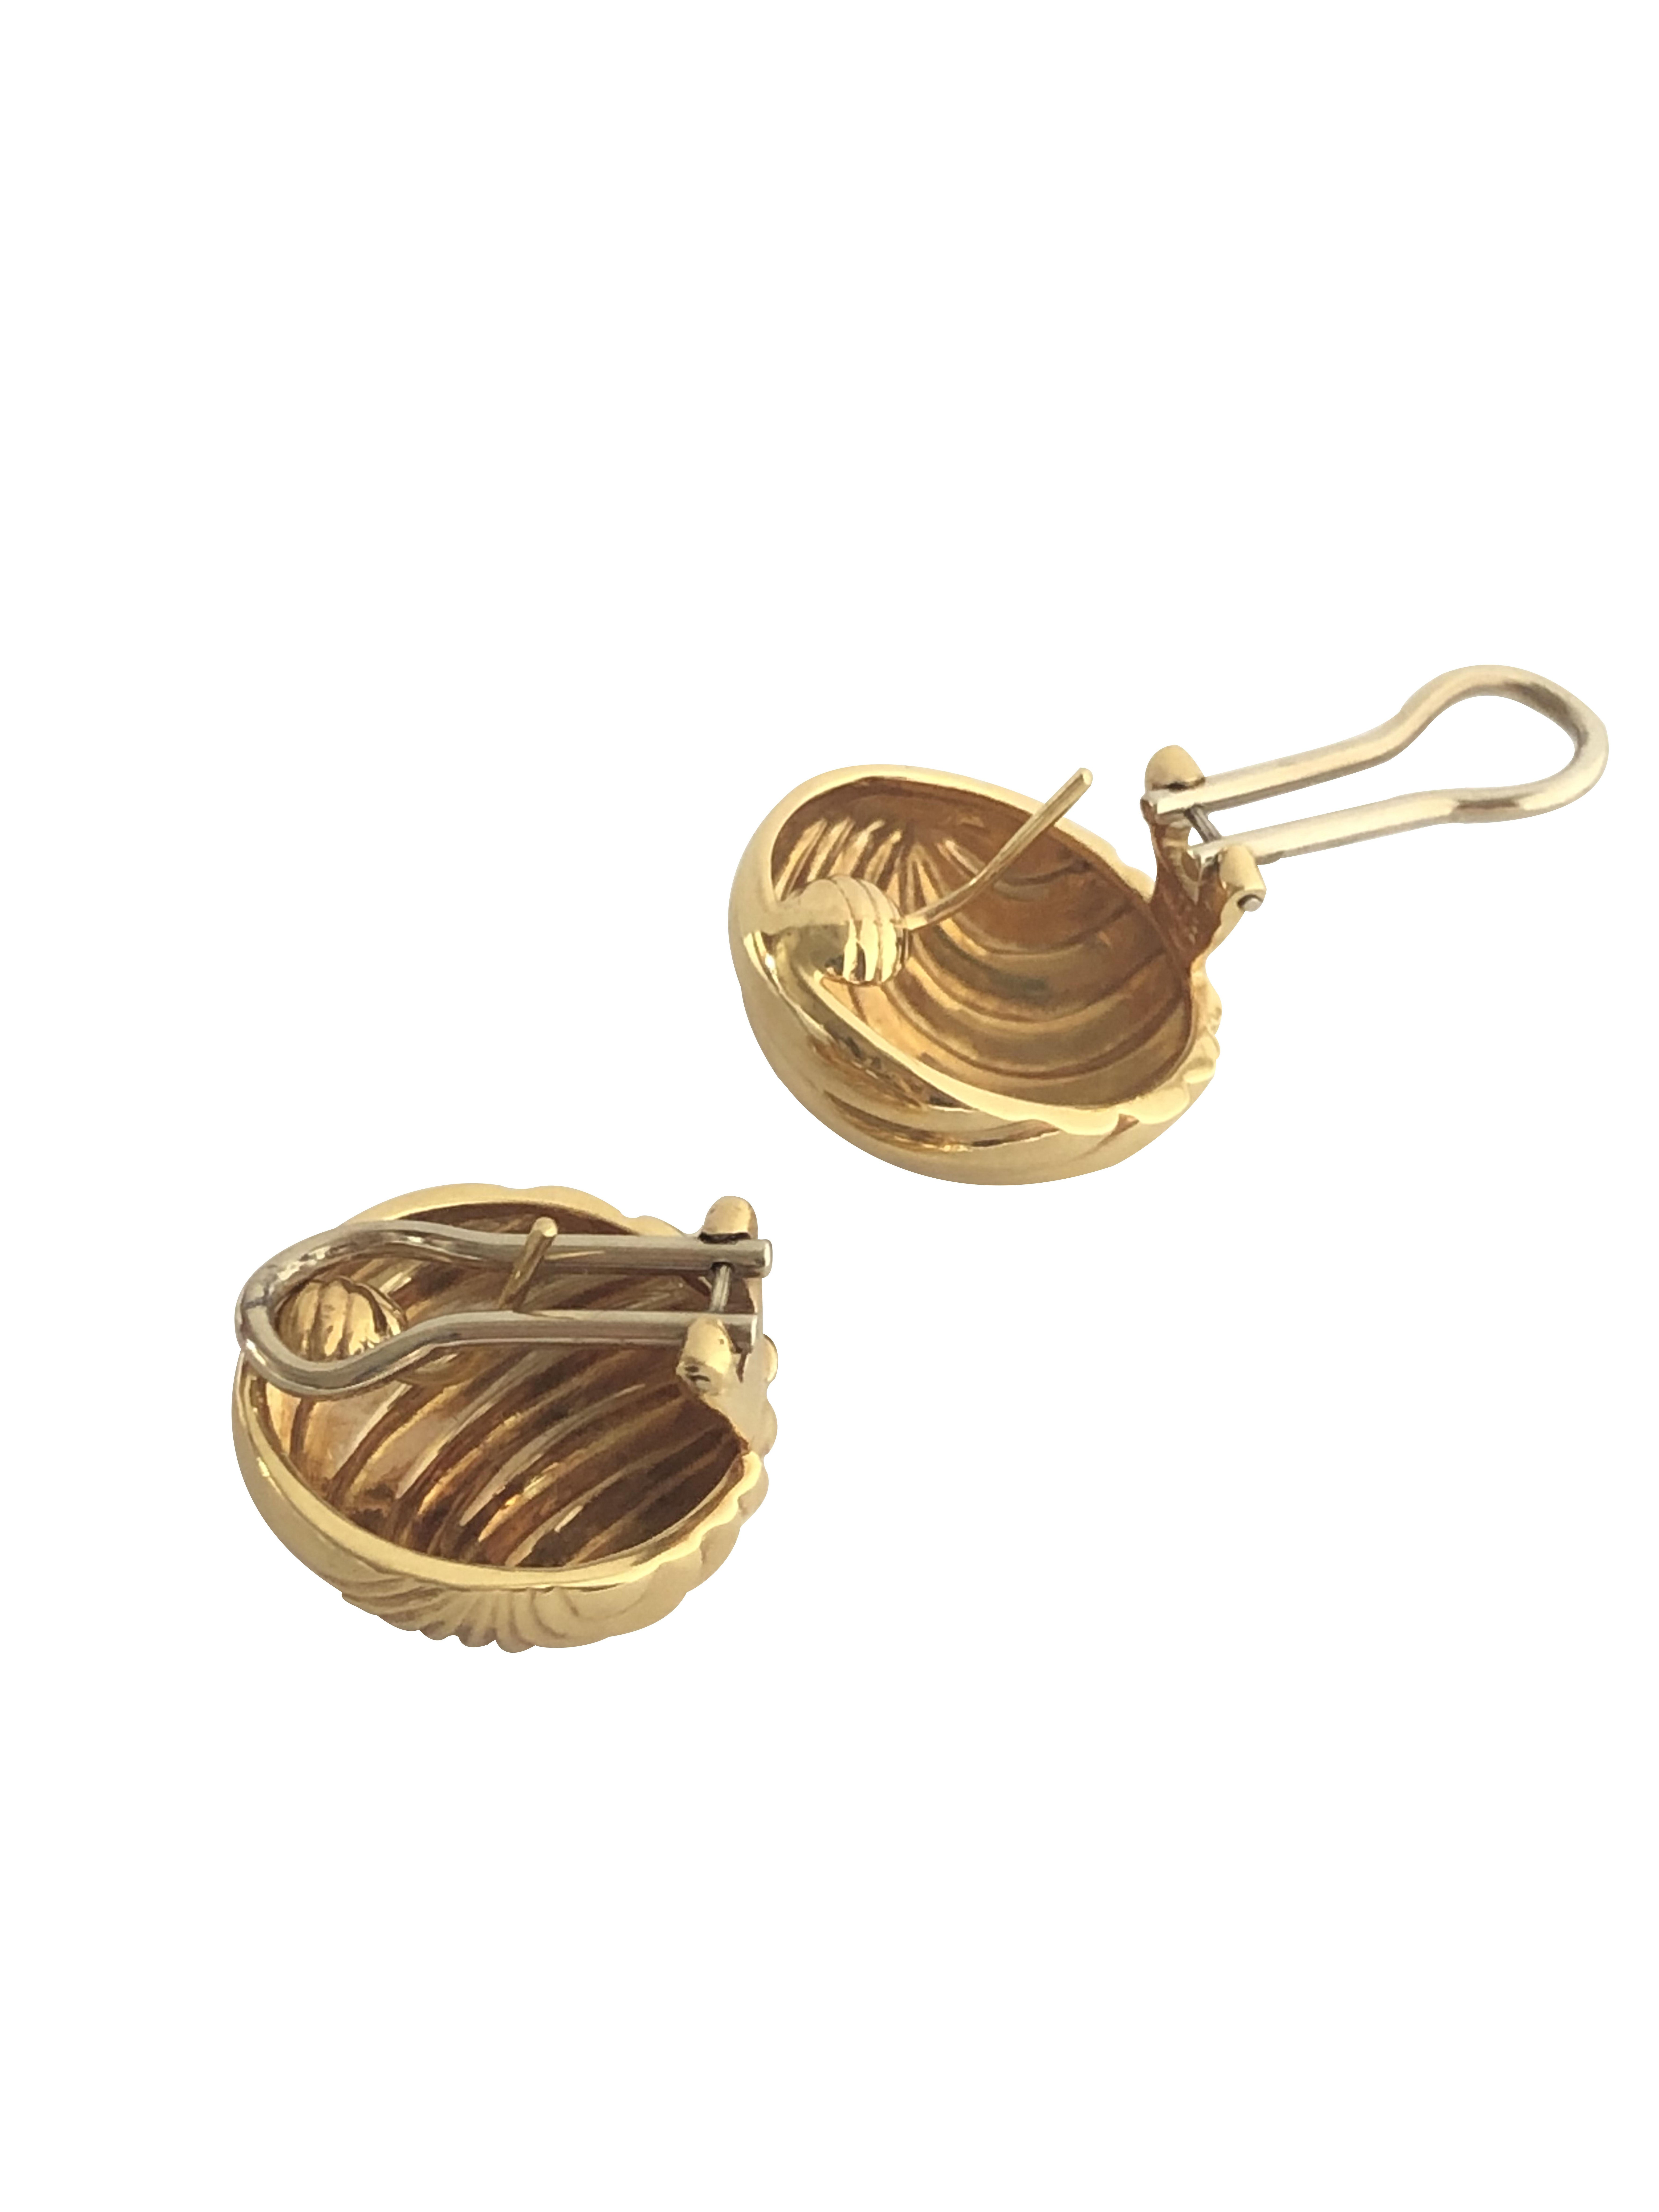 Circa 2000 Cellini of Italy 18K yellow Gold Shell form Earrings, measuring 3/4 X 3/4 inch, Solid construction with good weight. Having Posts with an Omega Clip. 